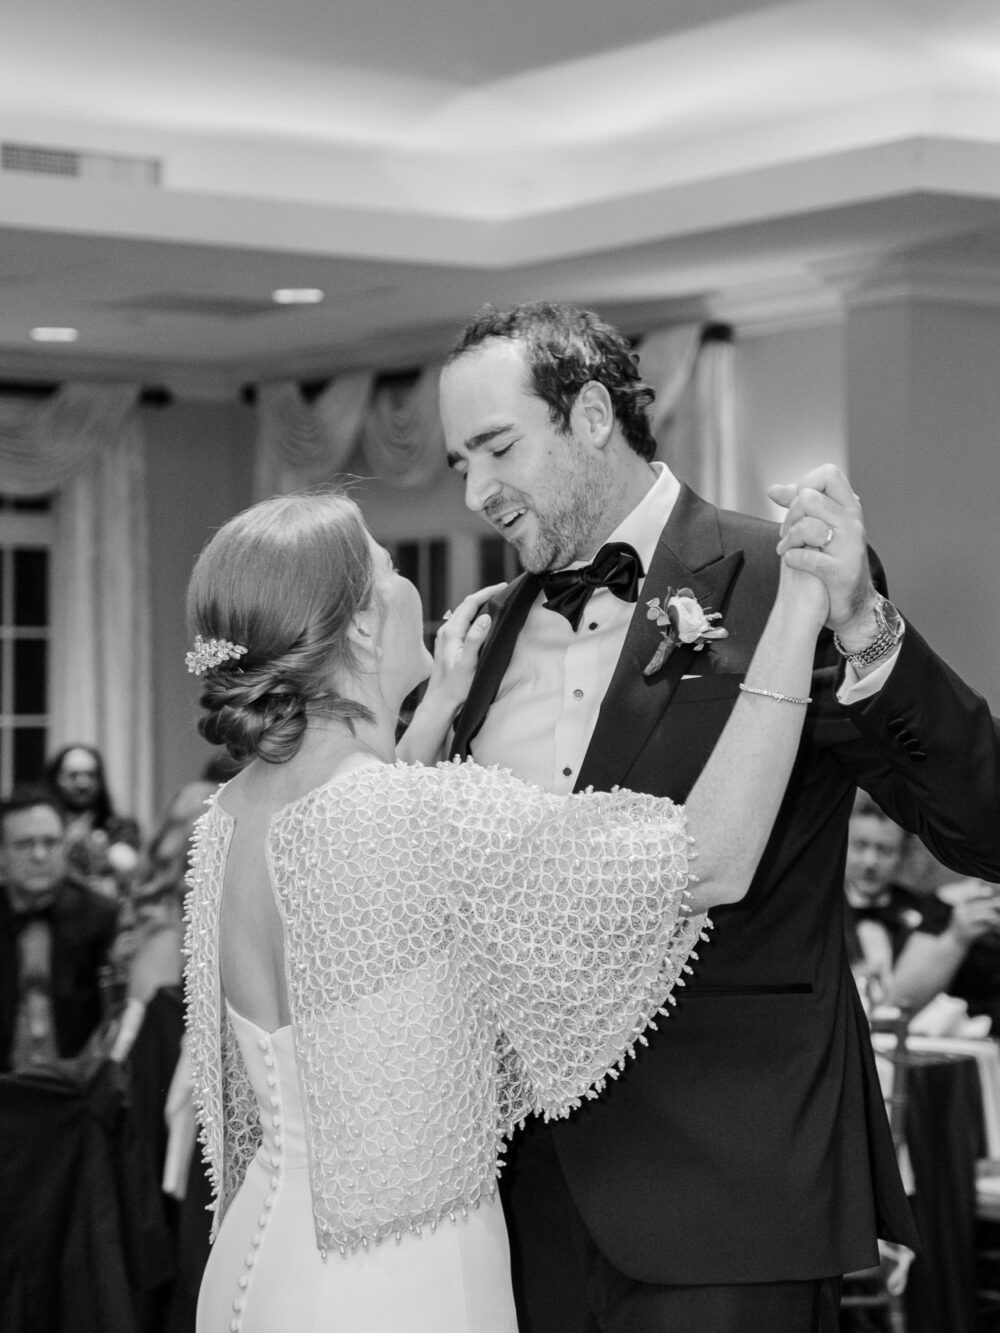 Bride and groom's first dance at Glidden House reception